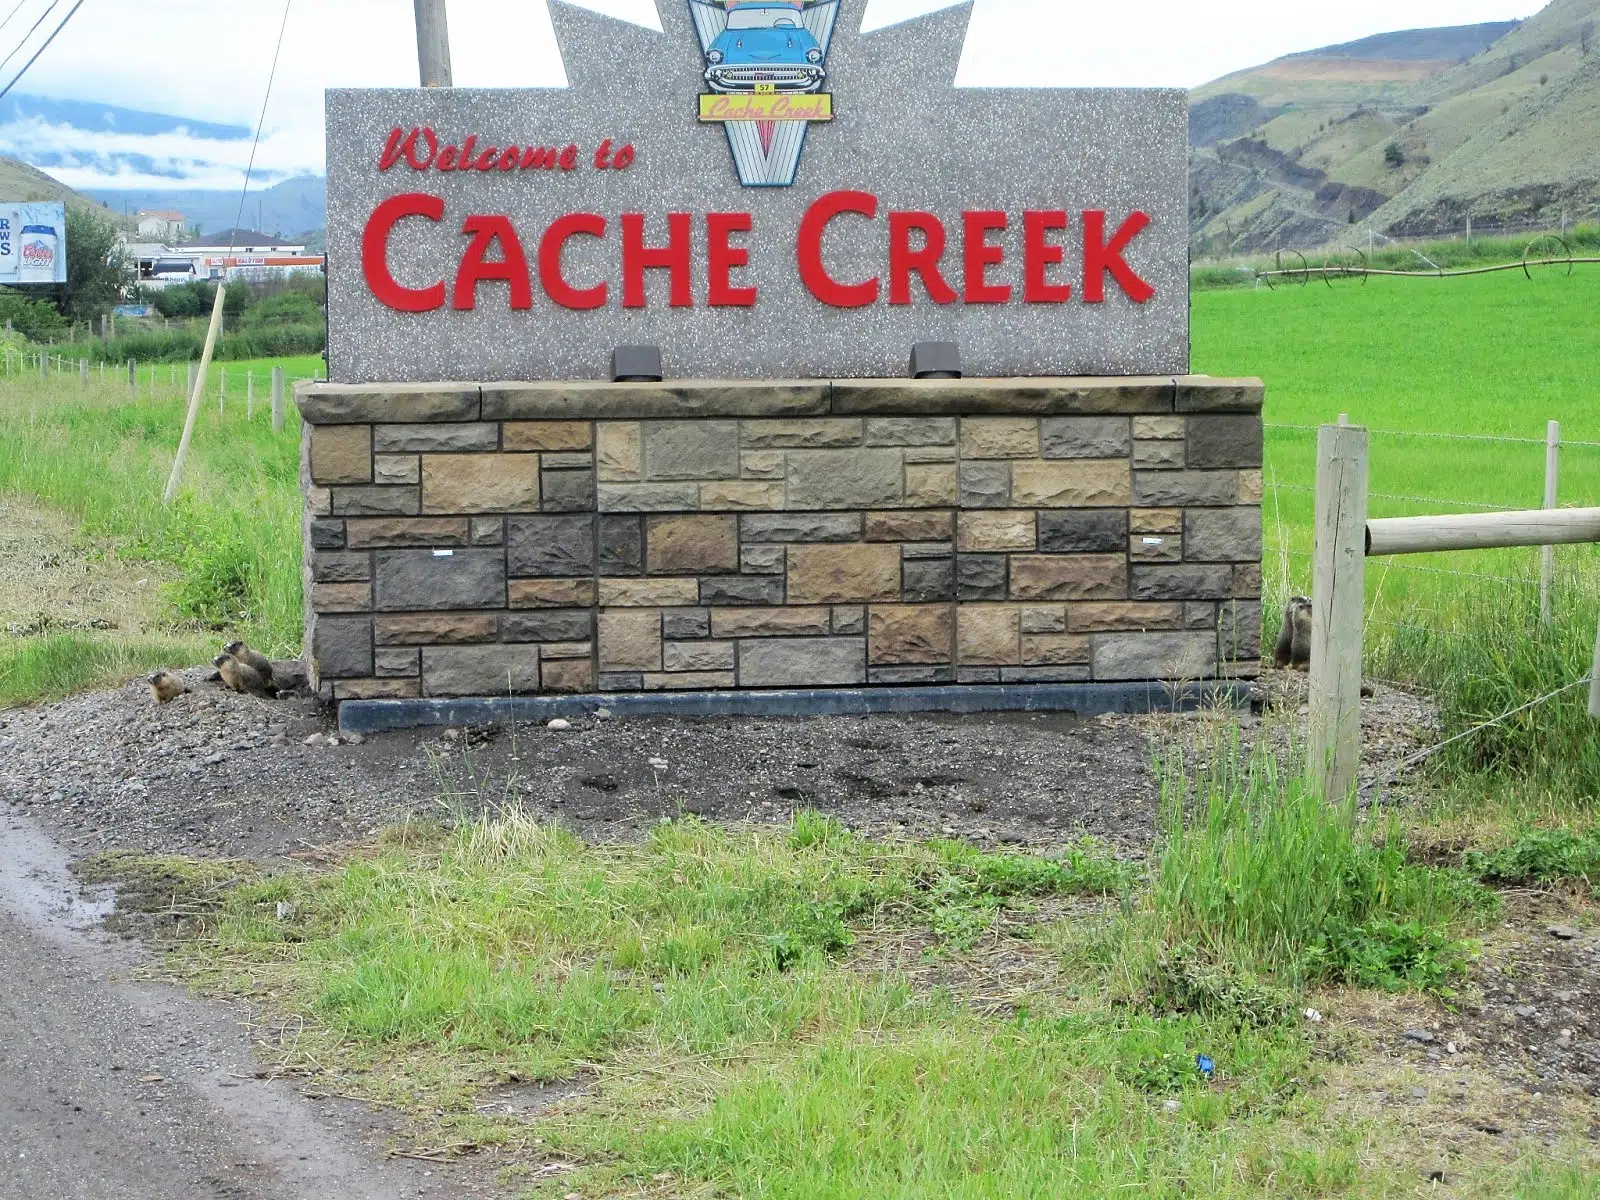 Weekend flooding situation mostly stable in Cache Creek